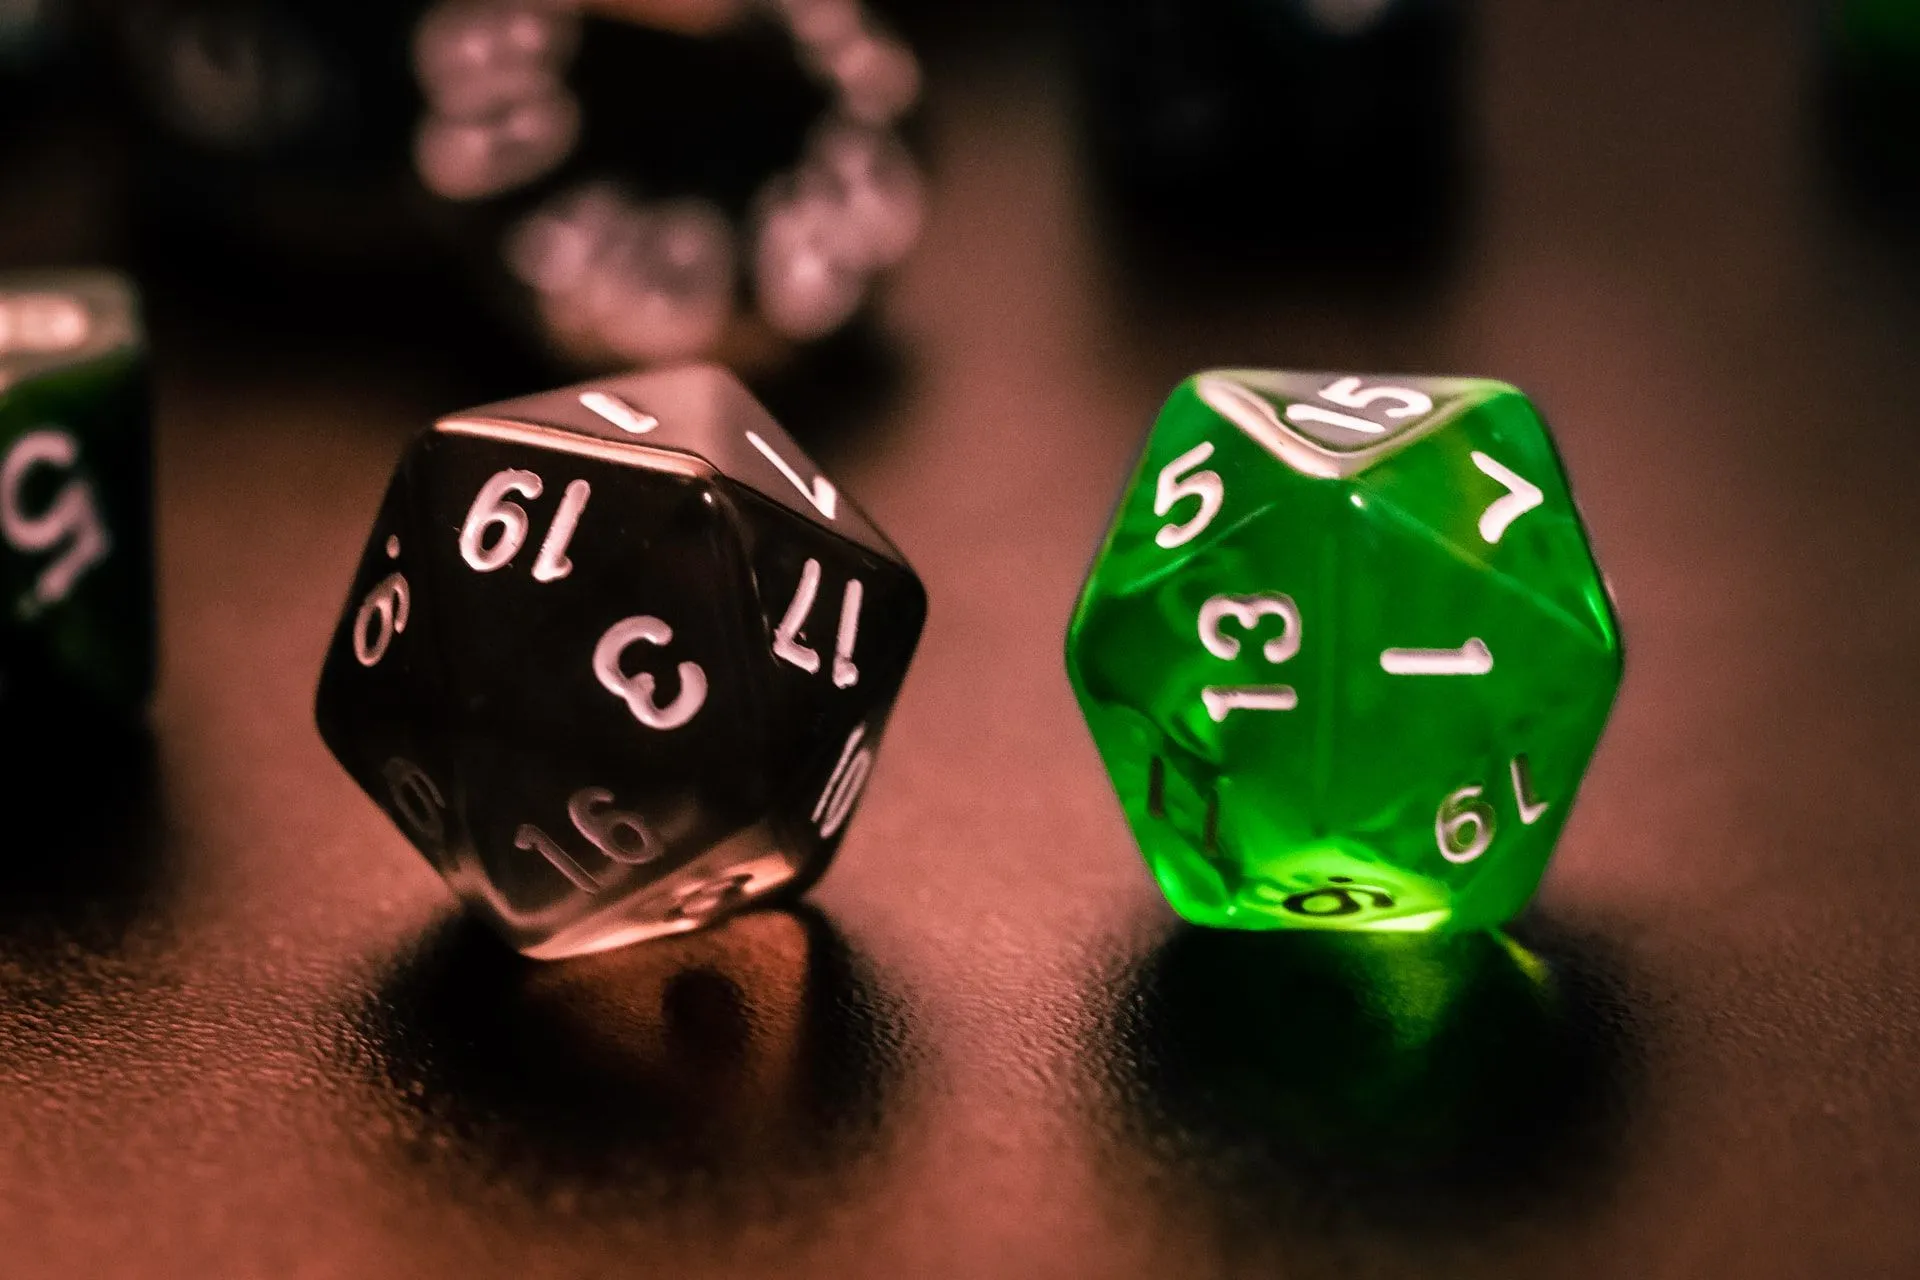 Black and green d20 dice from Dungeons and dragons